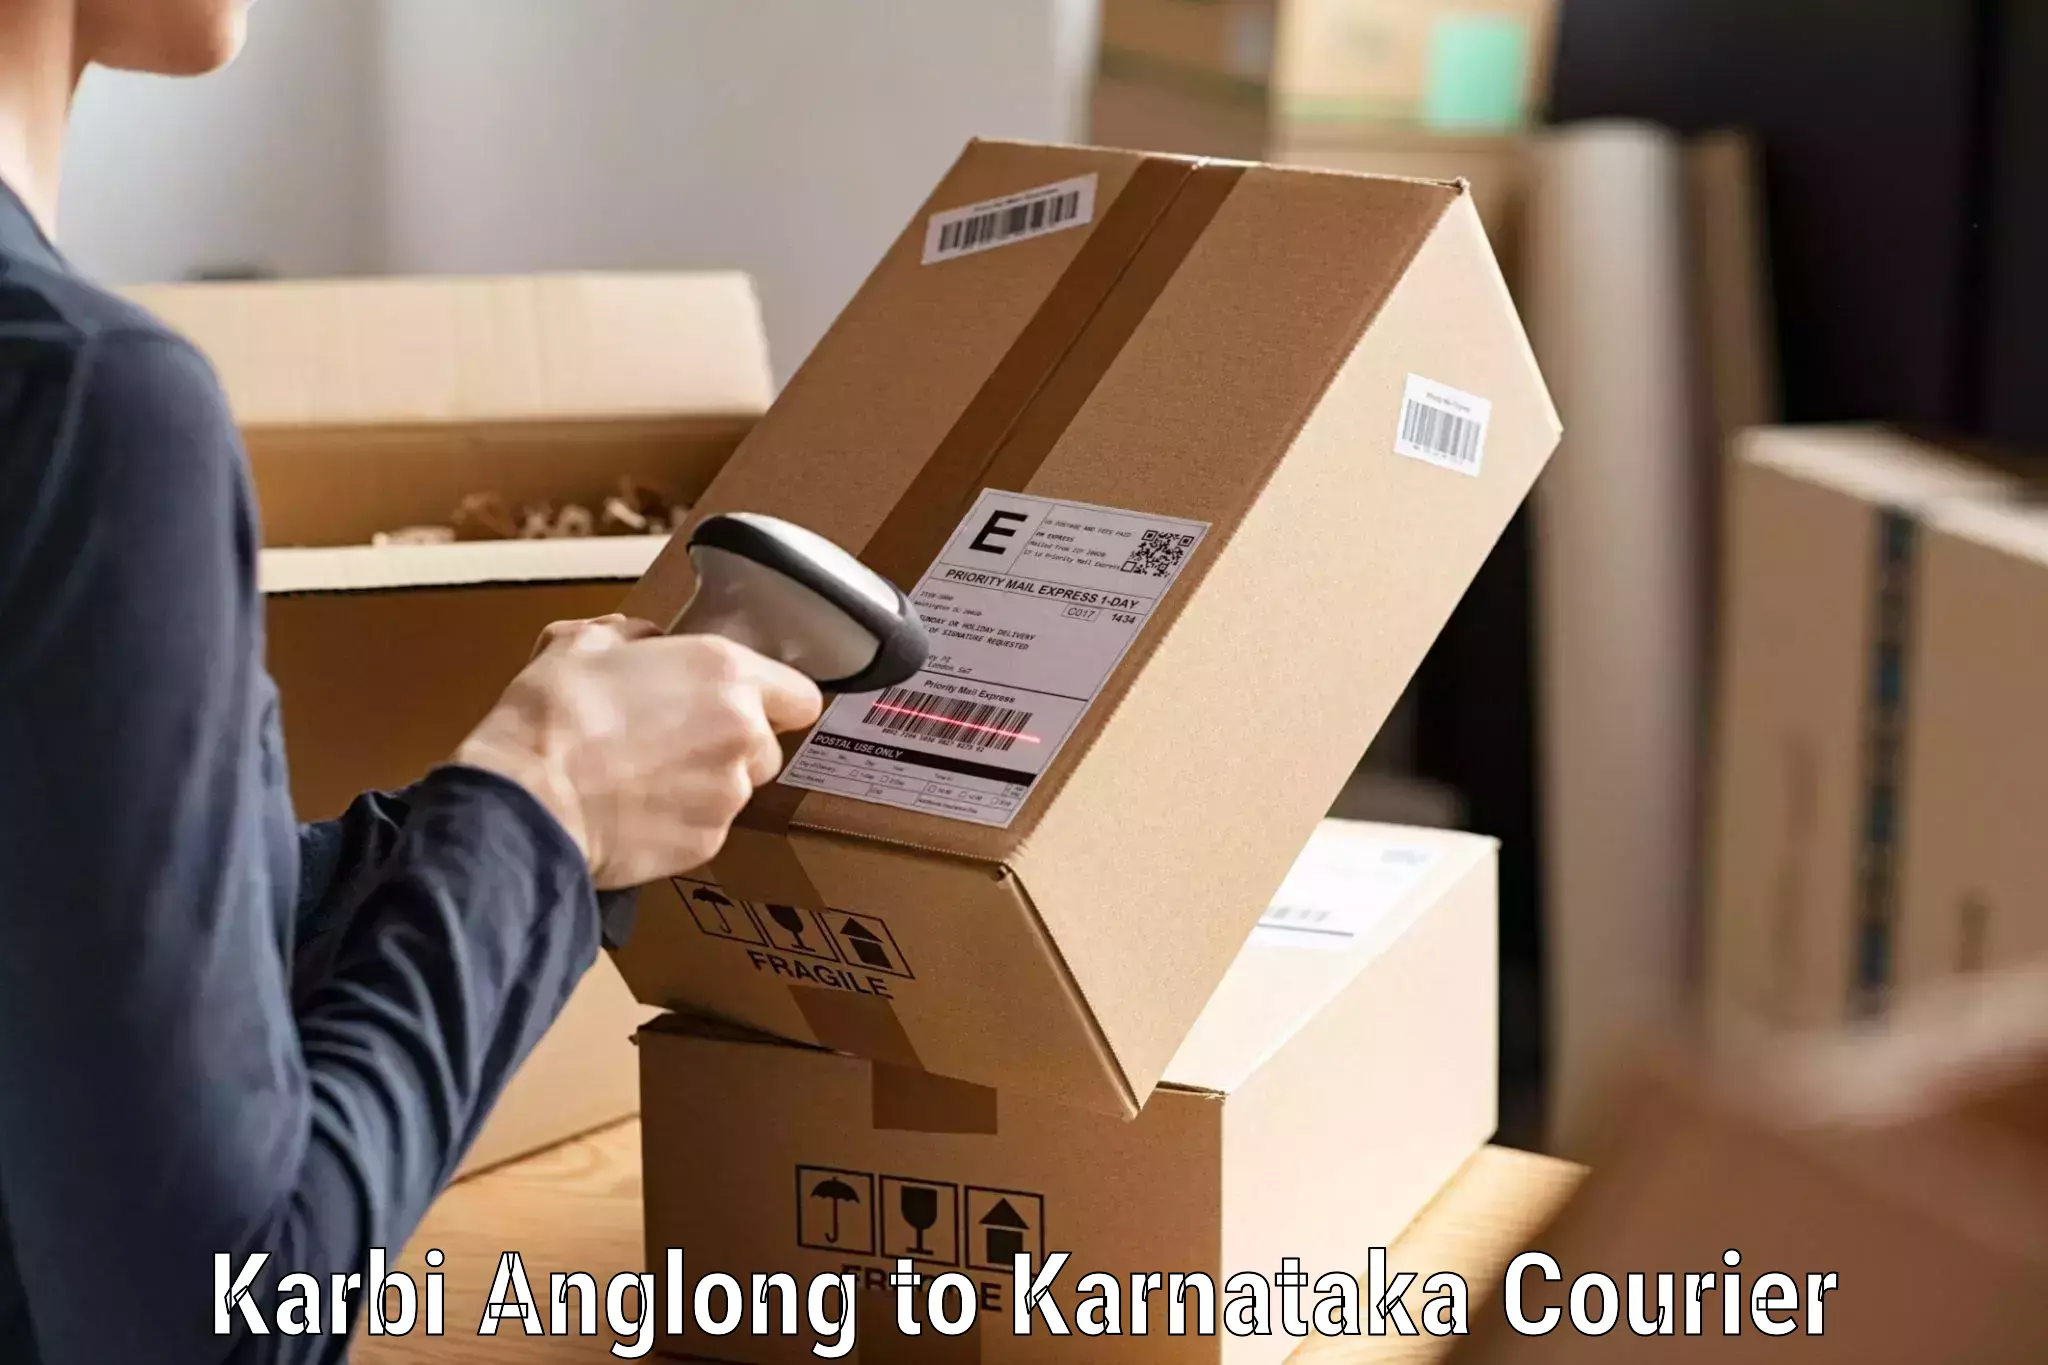 Sustainable courier practices Karbi Anglong to Humnabad